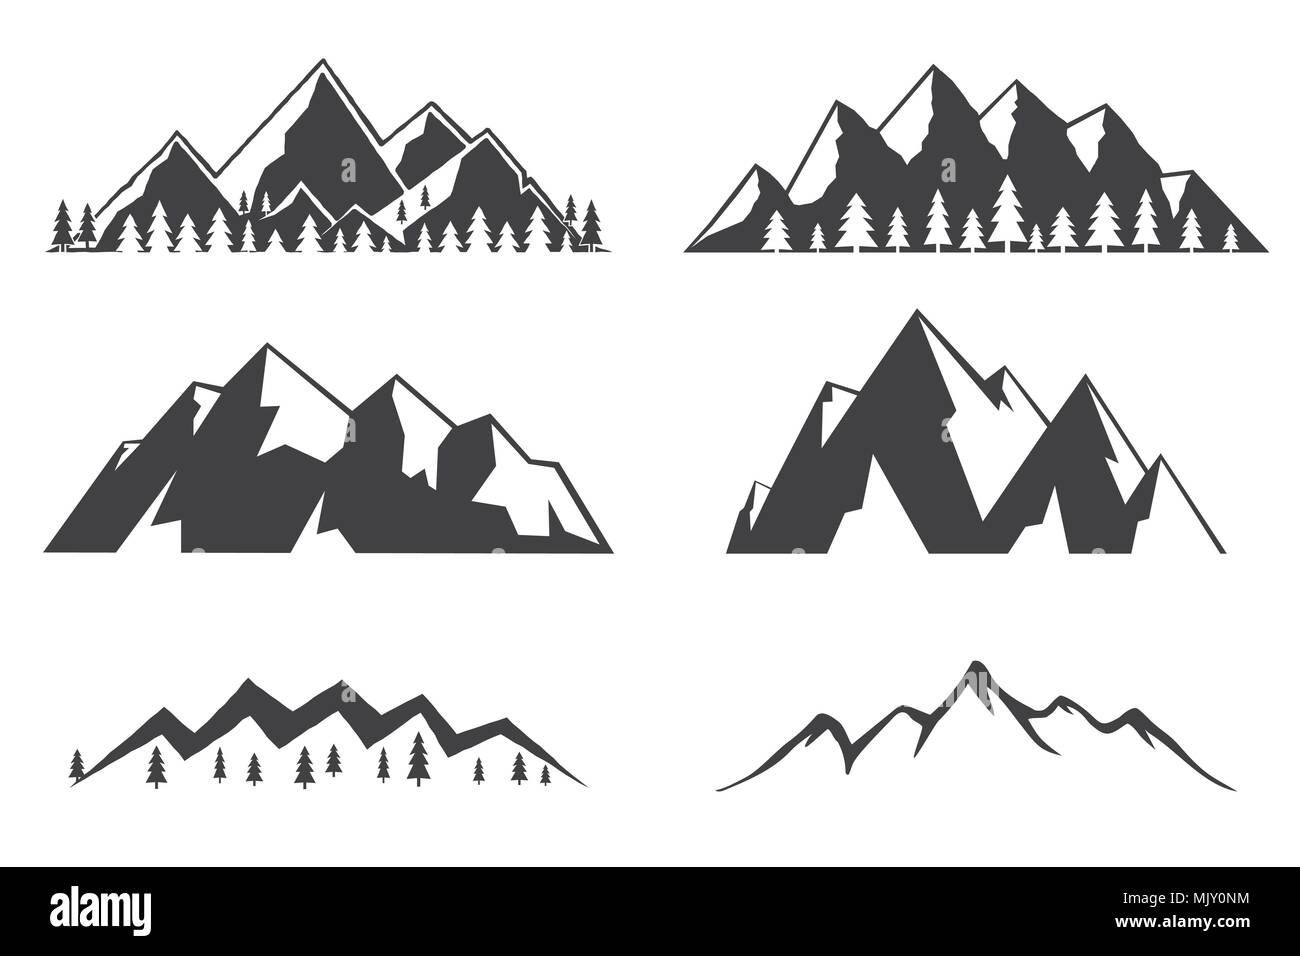 Set of mountains icons isolated on white background. Winter symbol for family vacation, activity or travel. For logo design, patches, seal, logo or ba Stock Vector